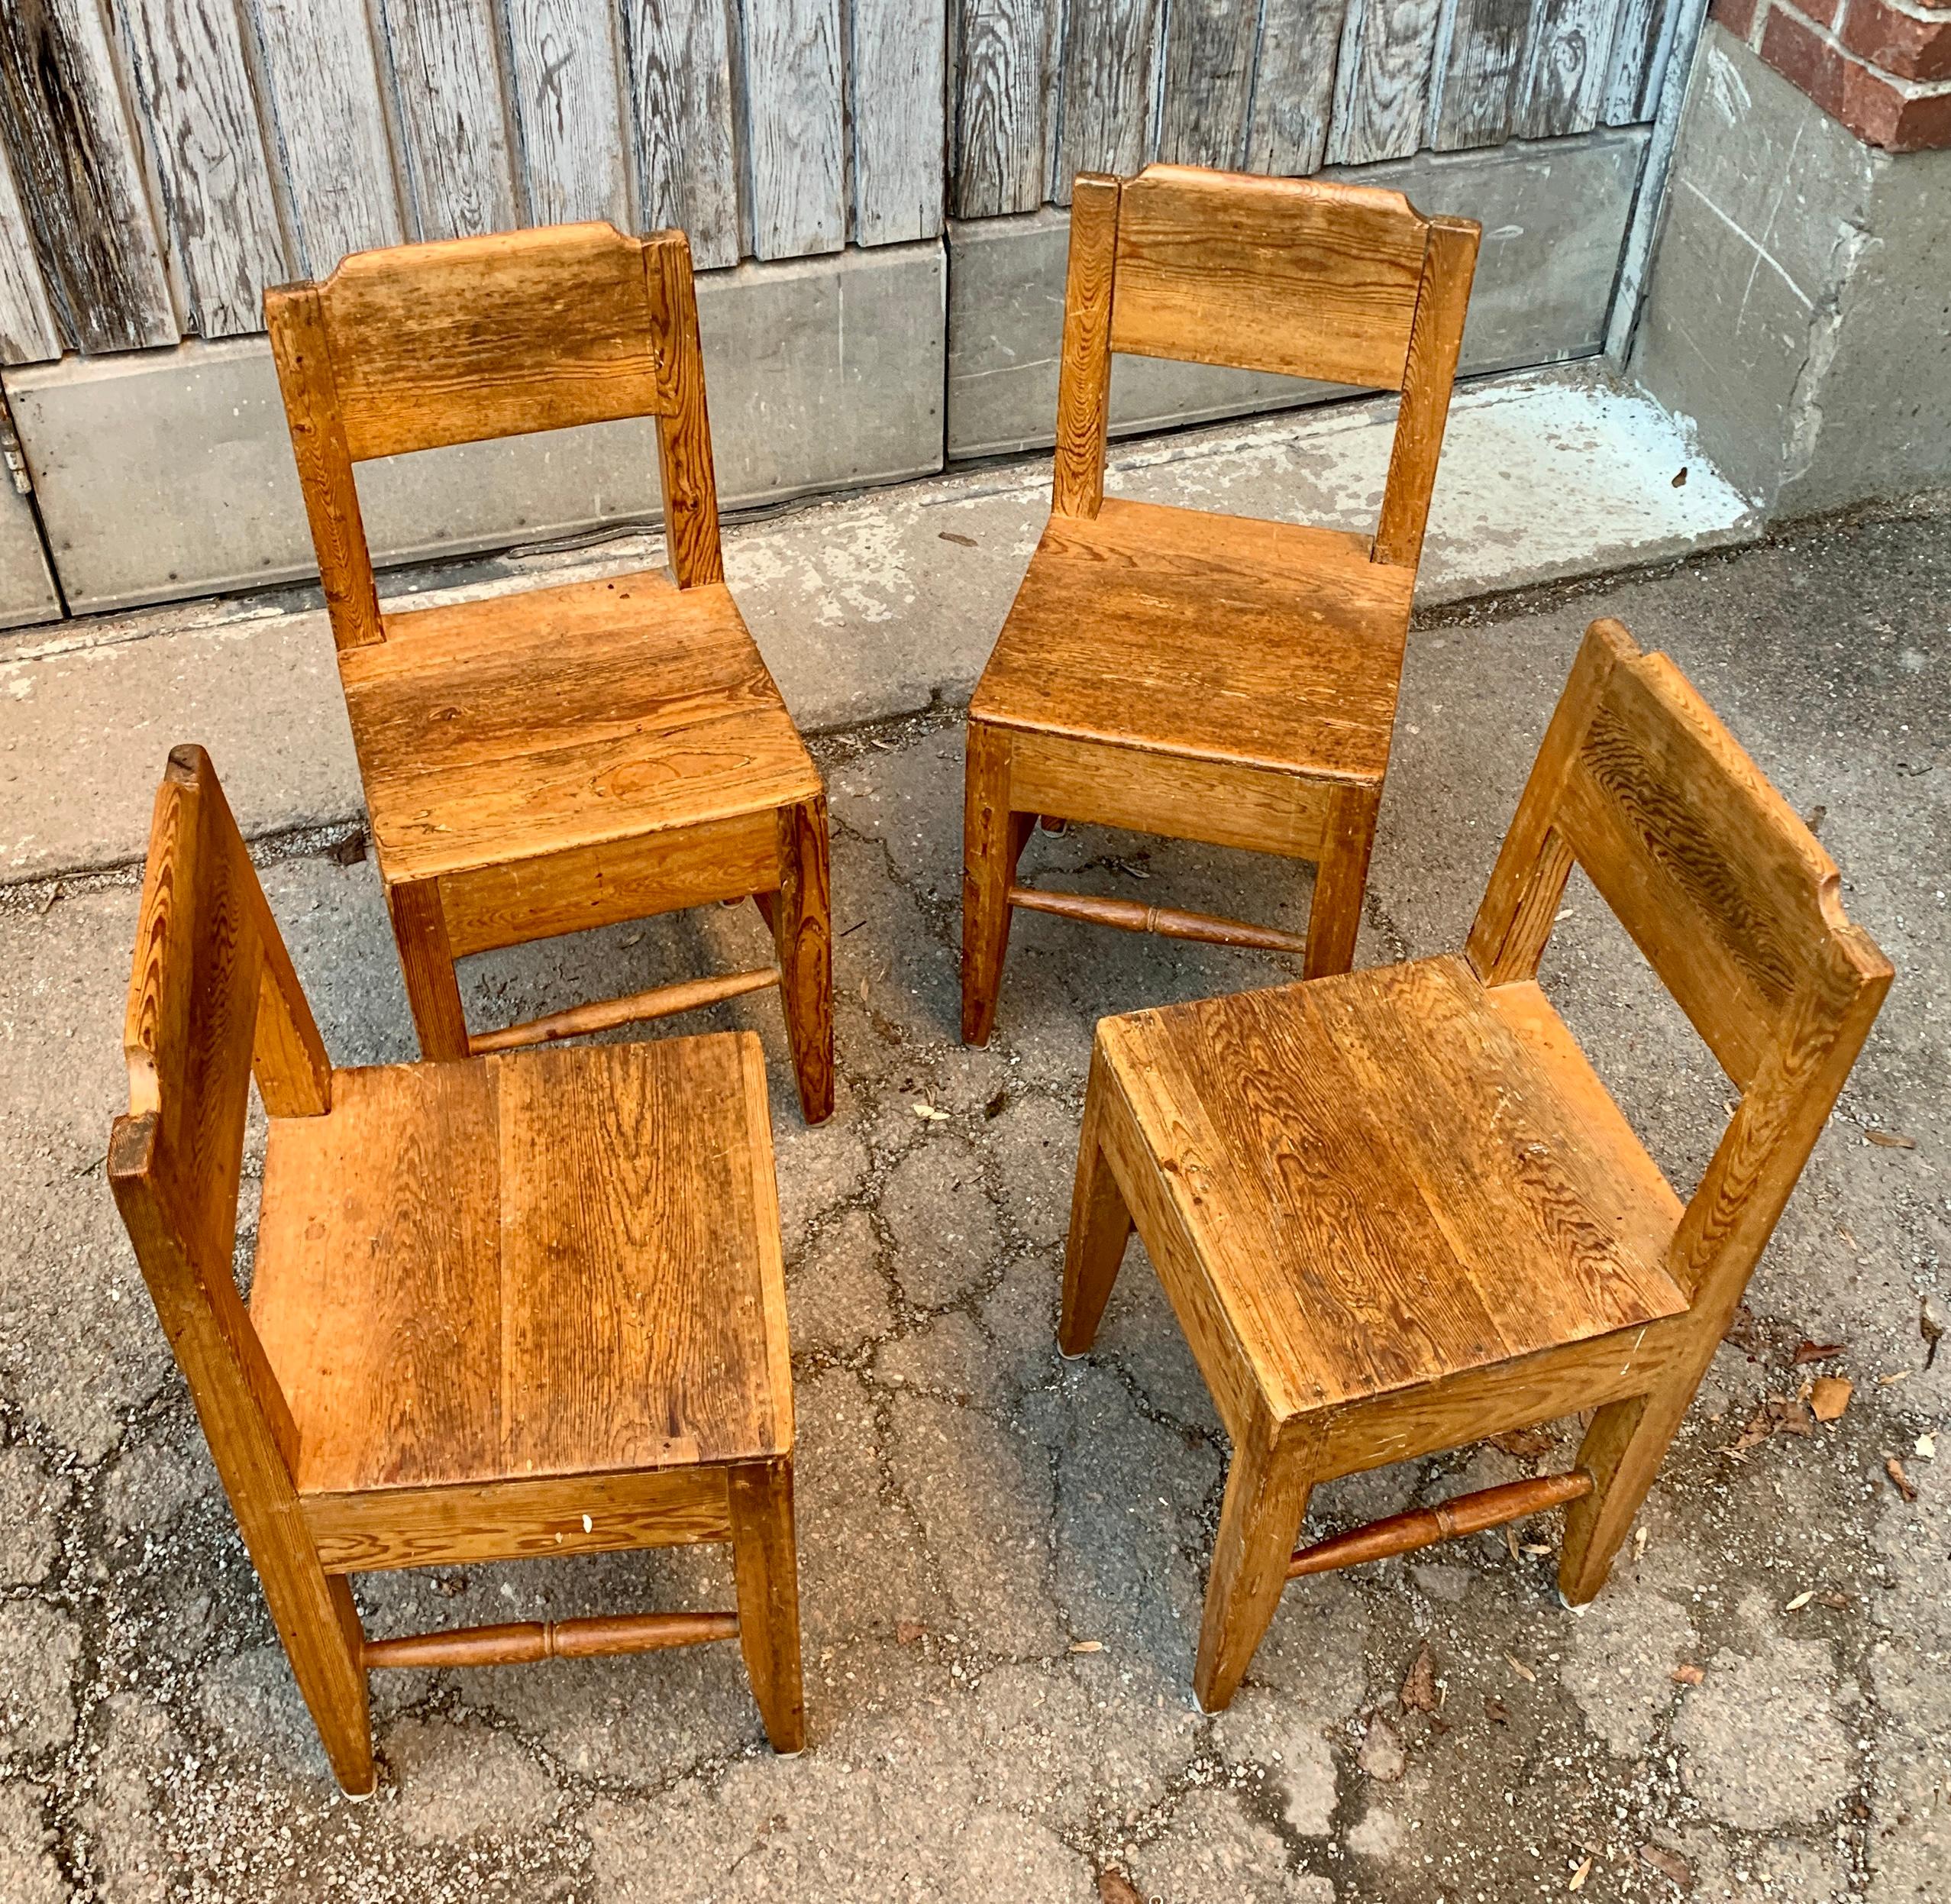 Set of four Swedish 18th Century Folk Art chairs

Set of 4 smaller chairs with its old vintage patina in pine. 